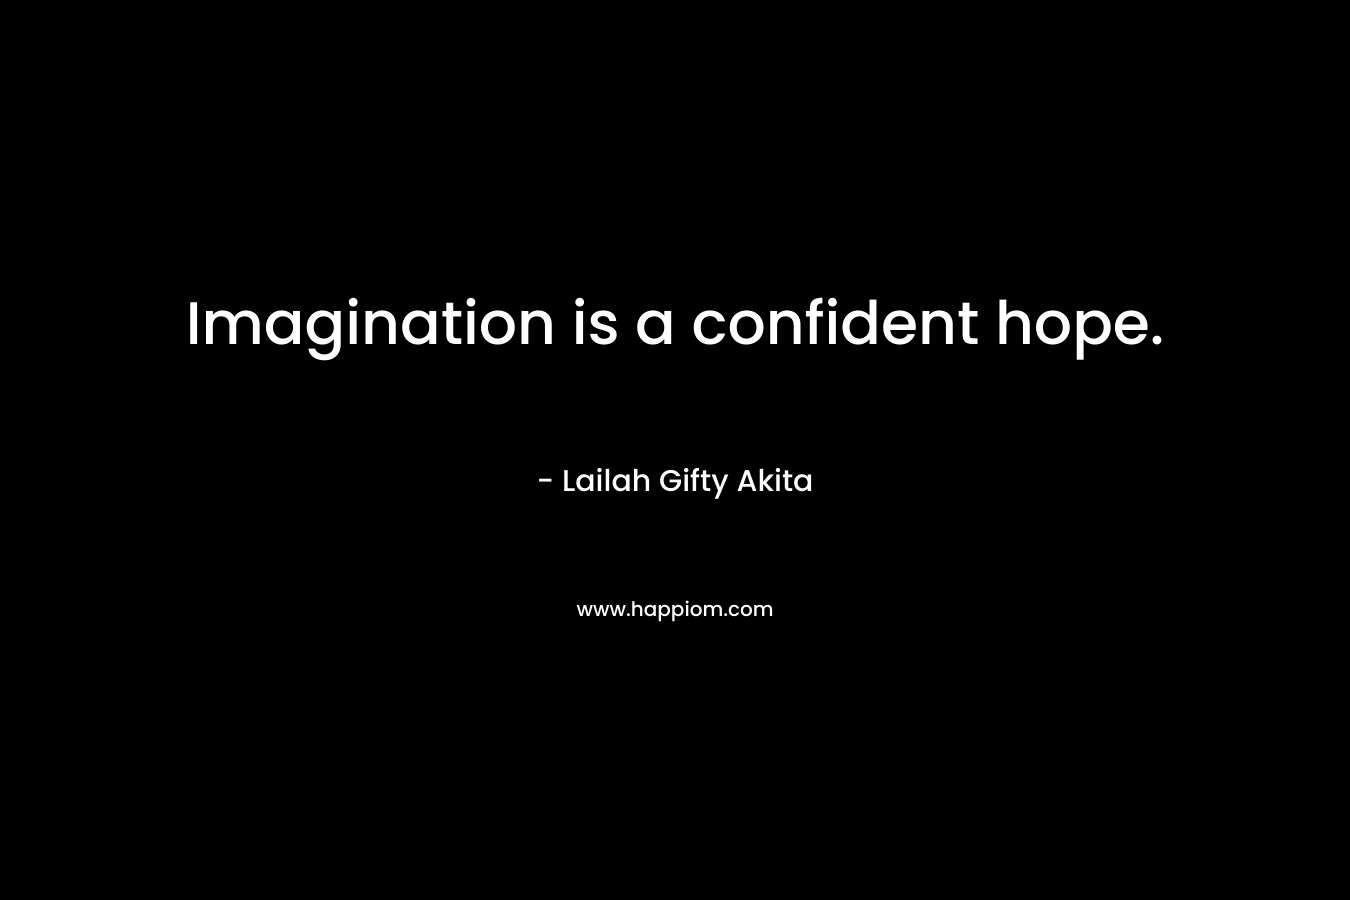 Imagination is a confident hope.